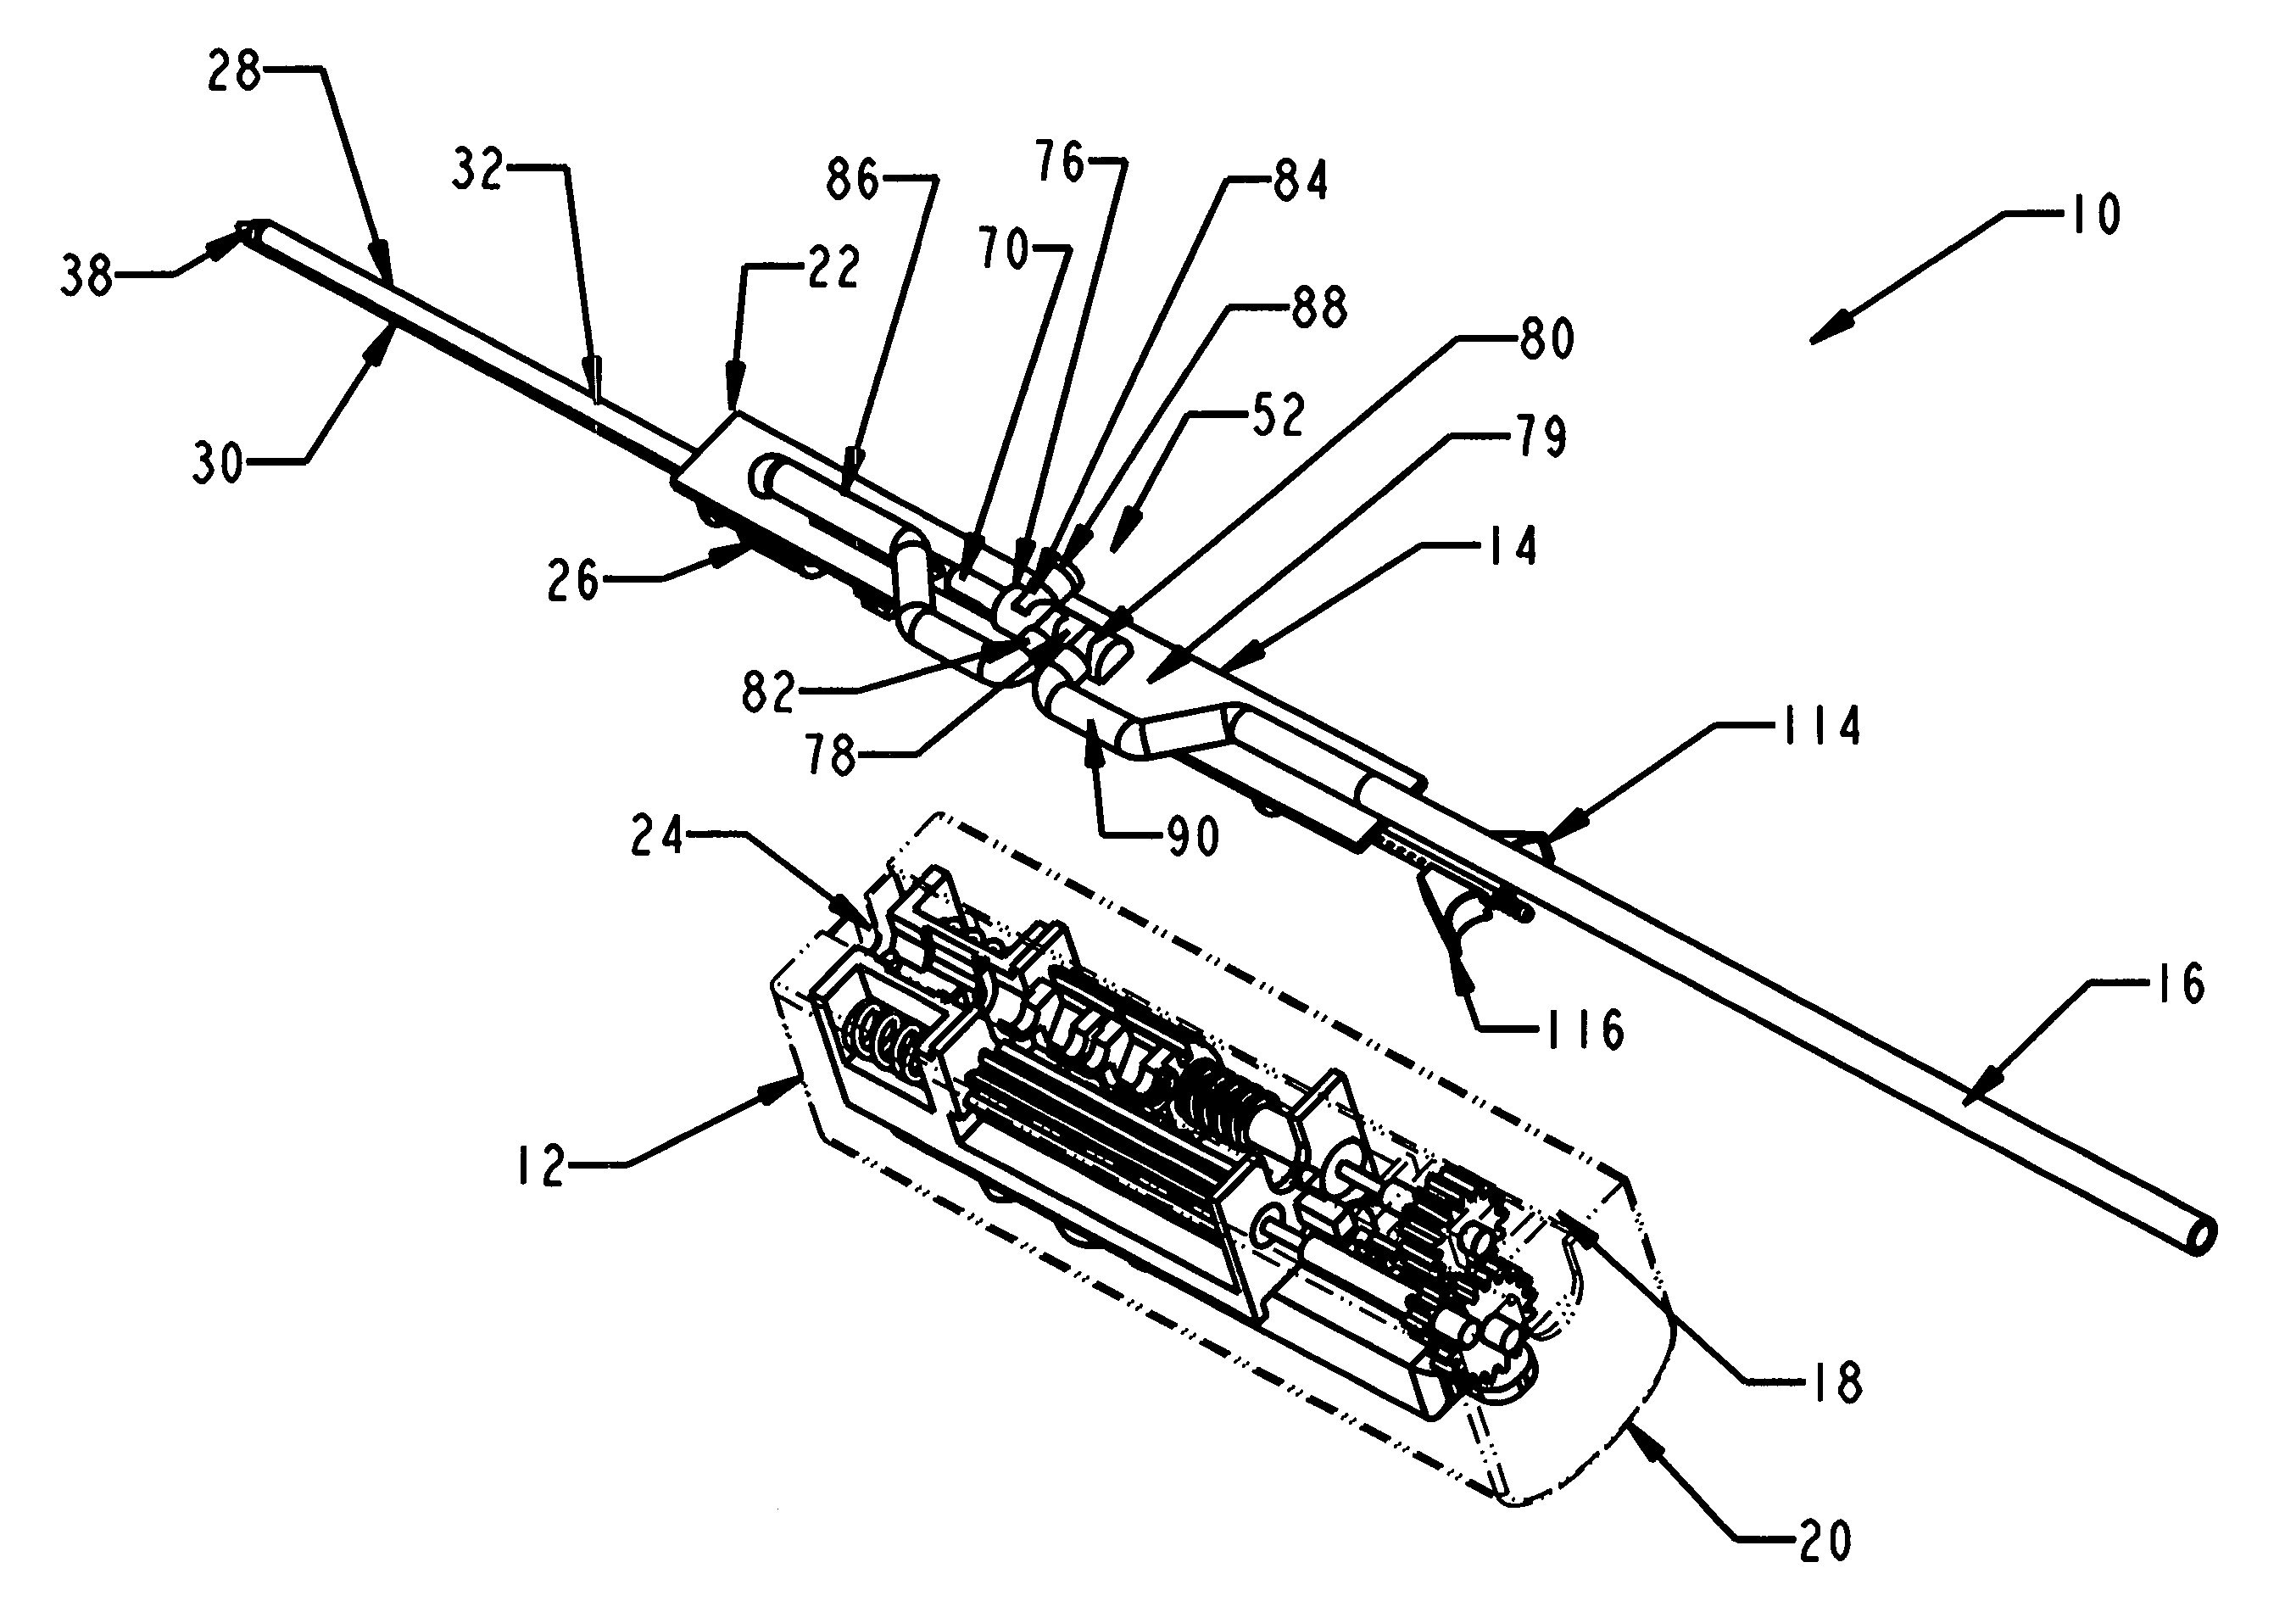 Biopsy device with replaceable probe and incorporating vibration insertion assist and static vacuum source sample stacking retrieval